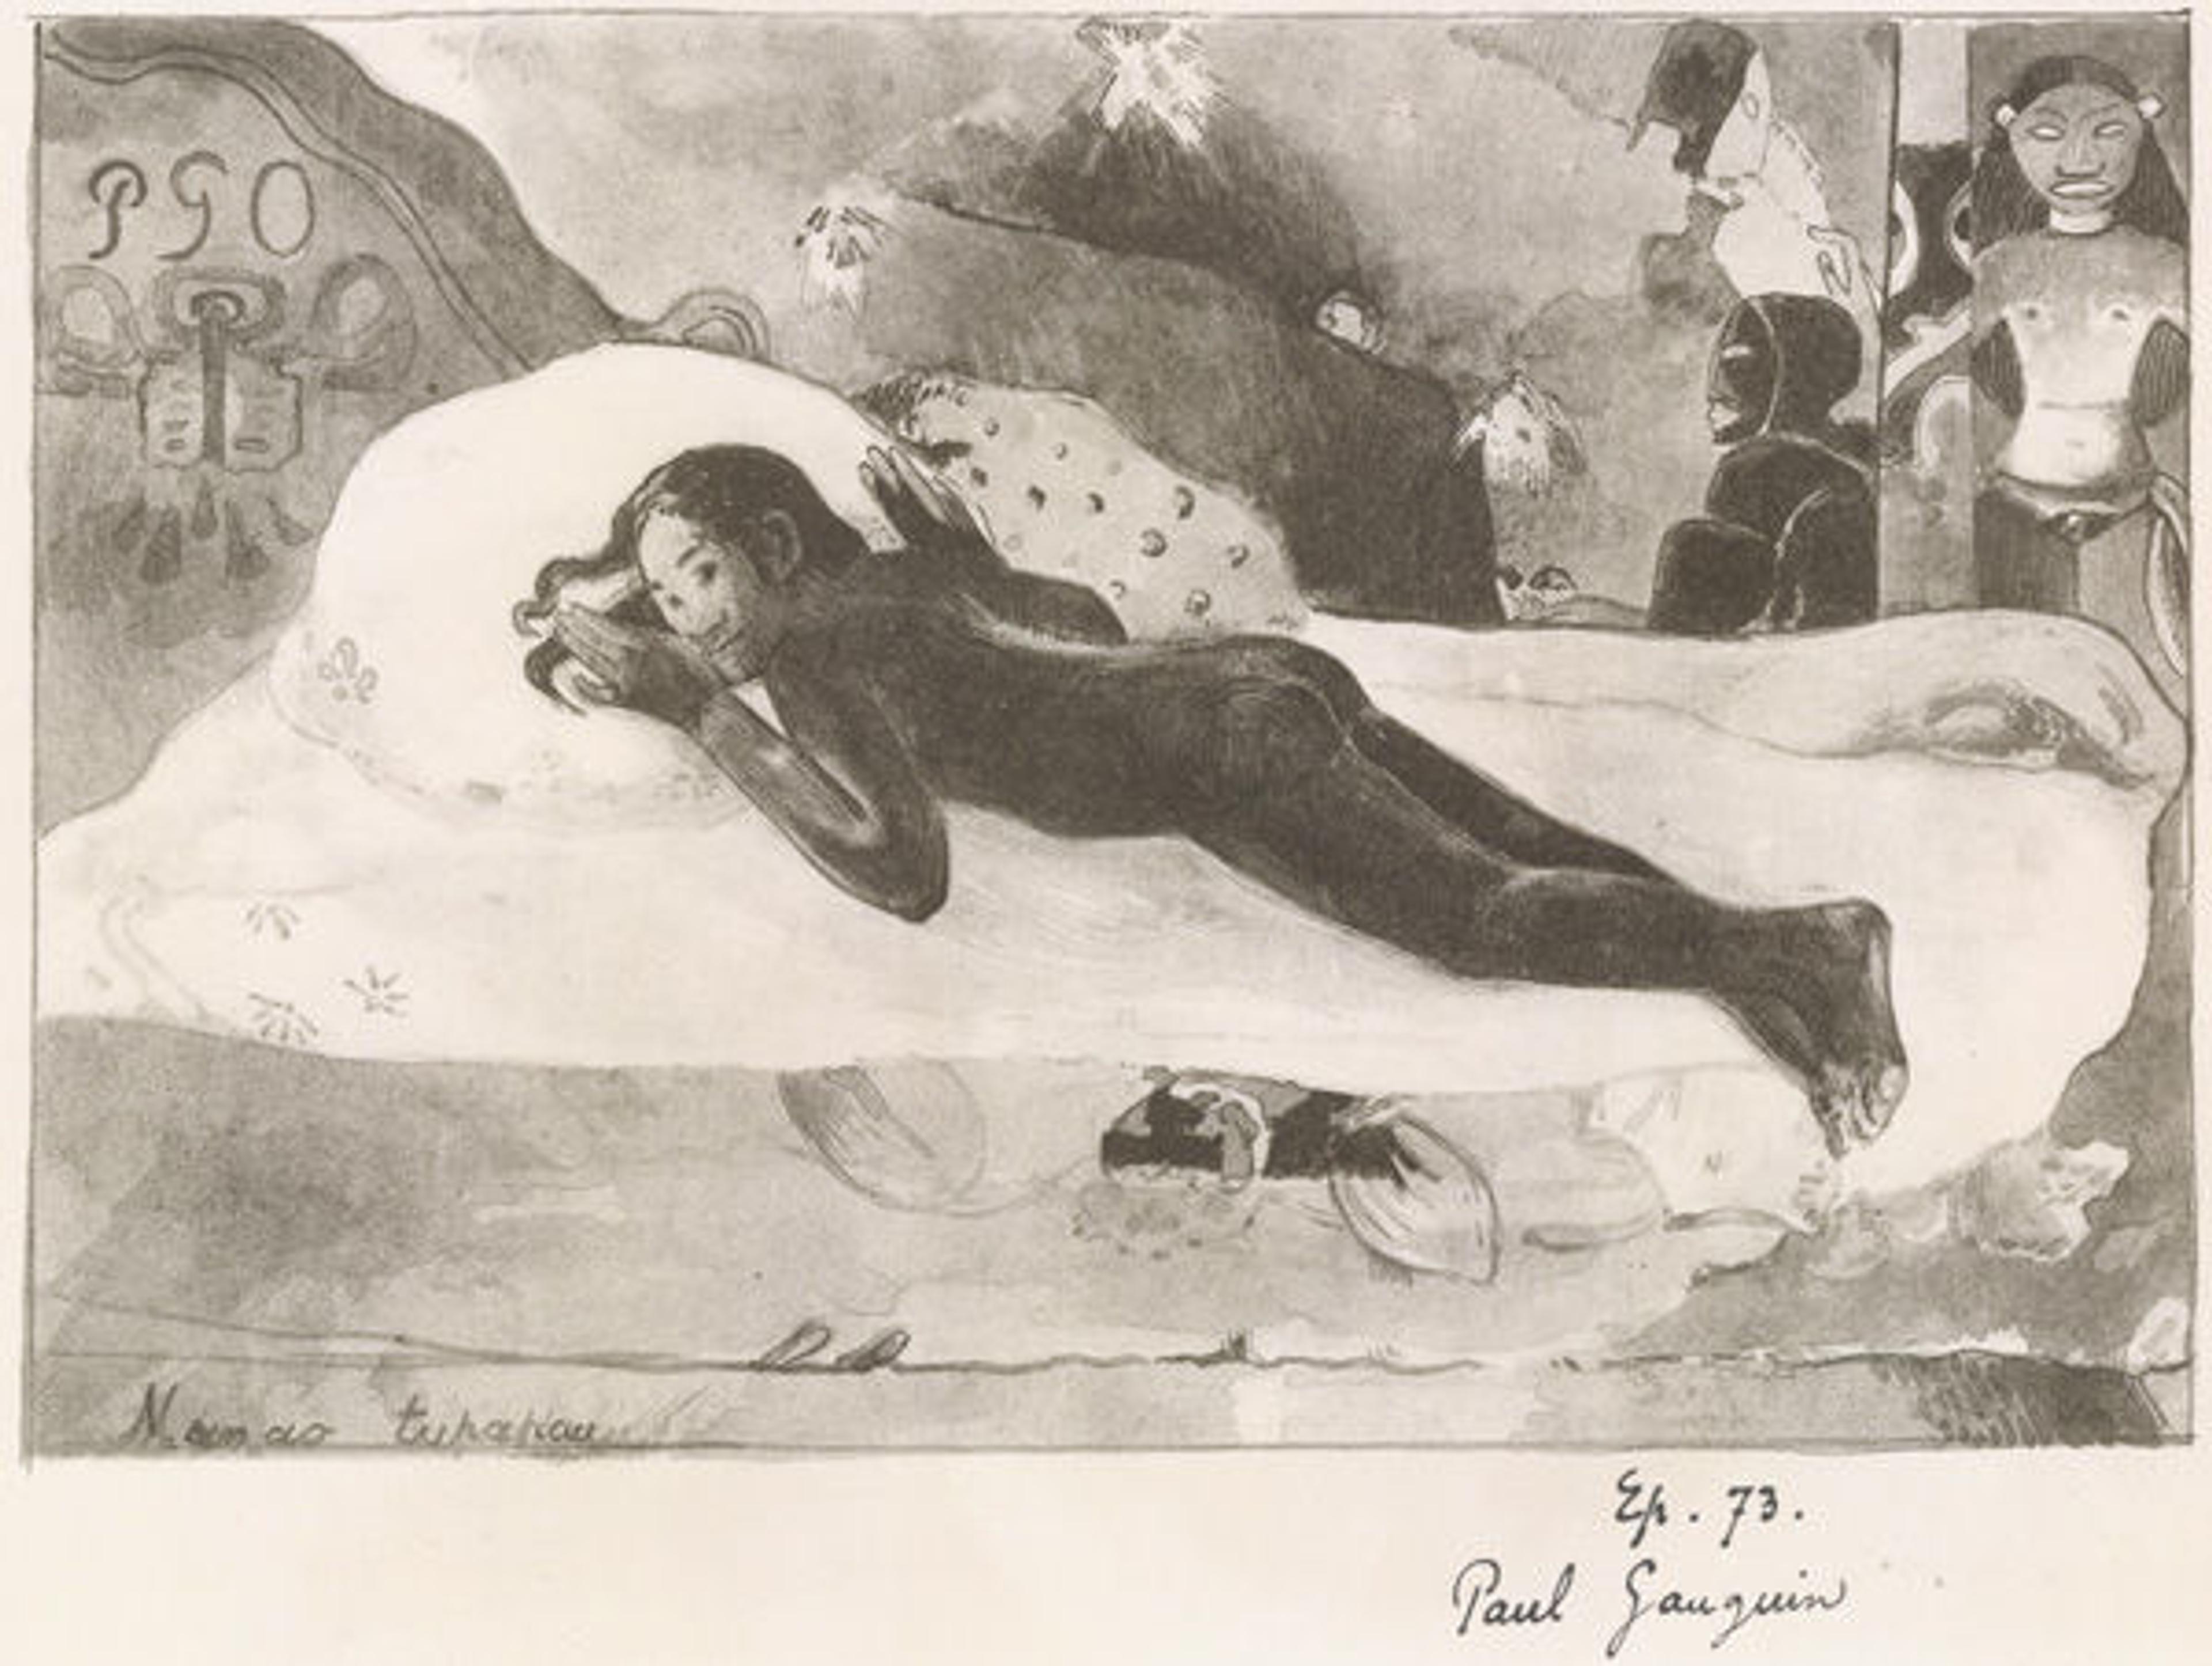 Spirit of the Dead Watching (Manao Tupapau) (from L'Estampe originale, Album VI), April–June 1894. Paul Gauguin (French, Paris 1848–1903. Publisher André Marty (French, born 1857). Zincograph on wove paper; image: 7 3/16 x 10 11/16 in. (18.3 x 27.2 cm). Sheet: 13 1/2 x 18 13/16 in. (34.3 x 47.8 cm). The Metropolitan Museum of Art, New York, Rogers Fund, 1922 (22.82.1-53)